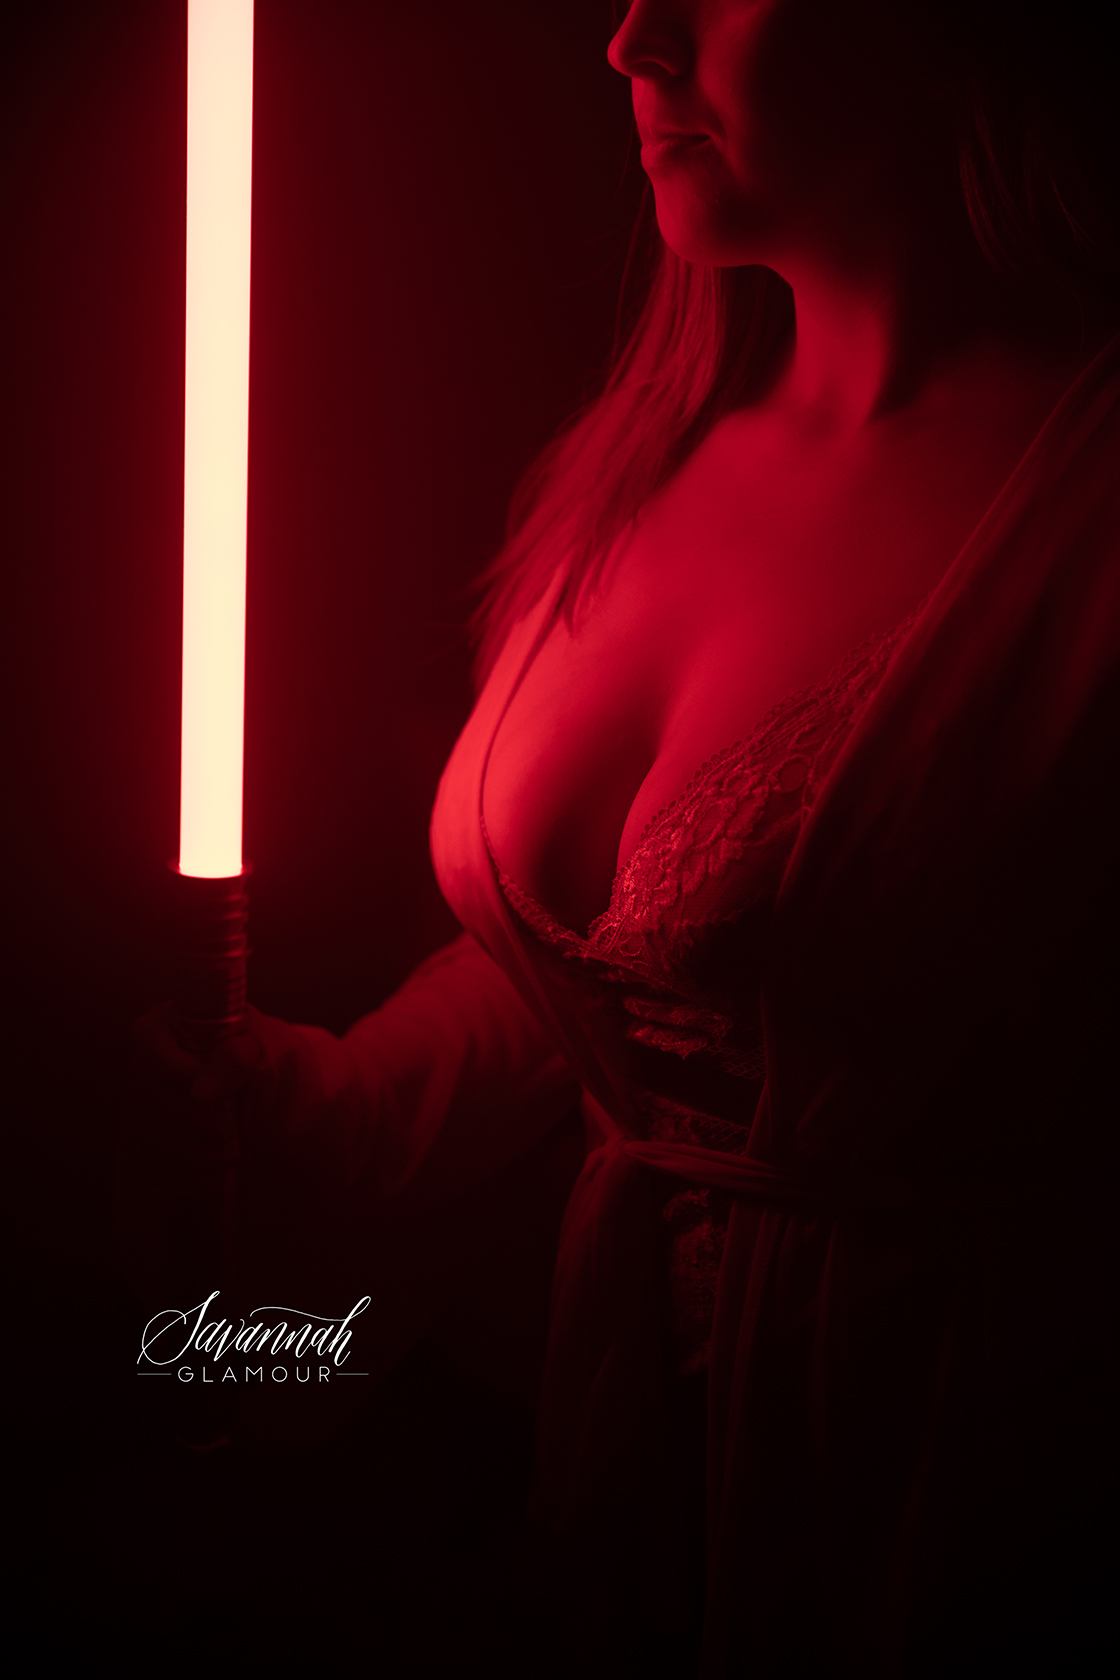 woman's chest wearing lingerie holding a lightsaber